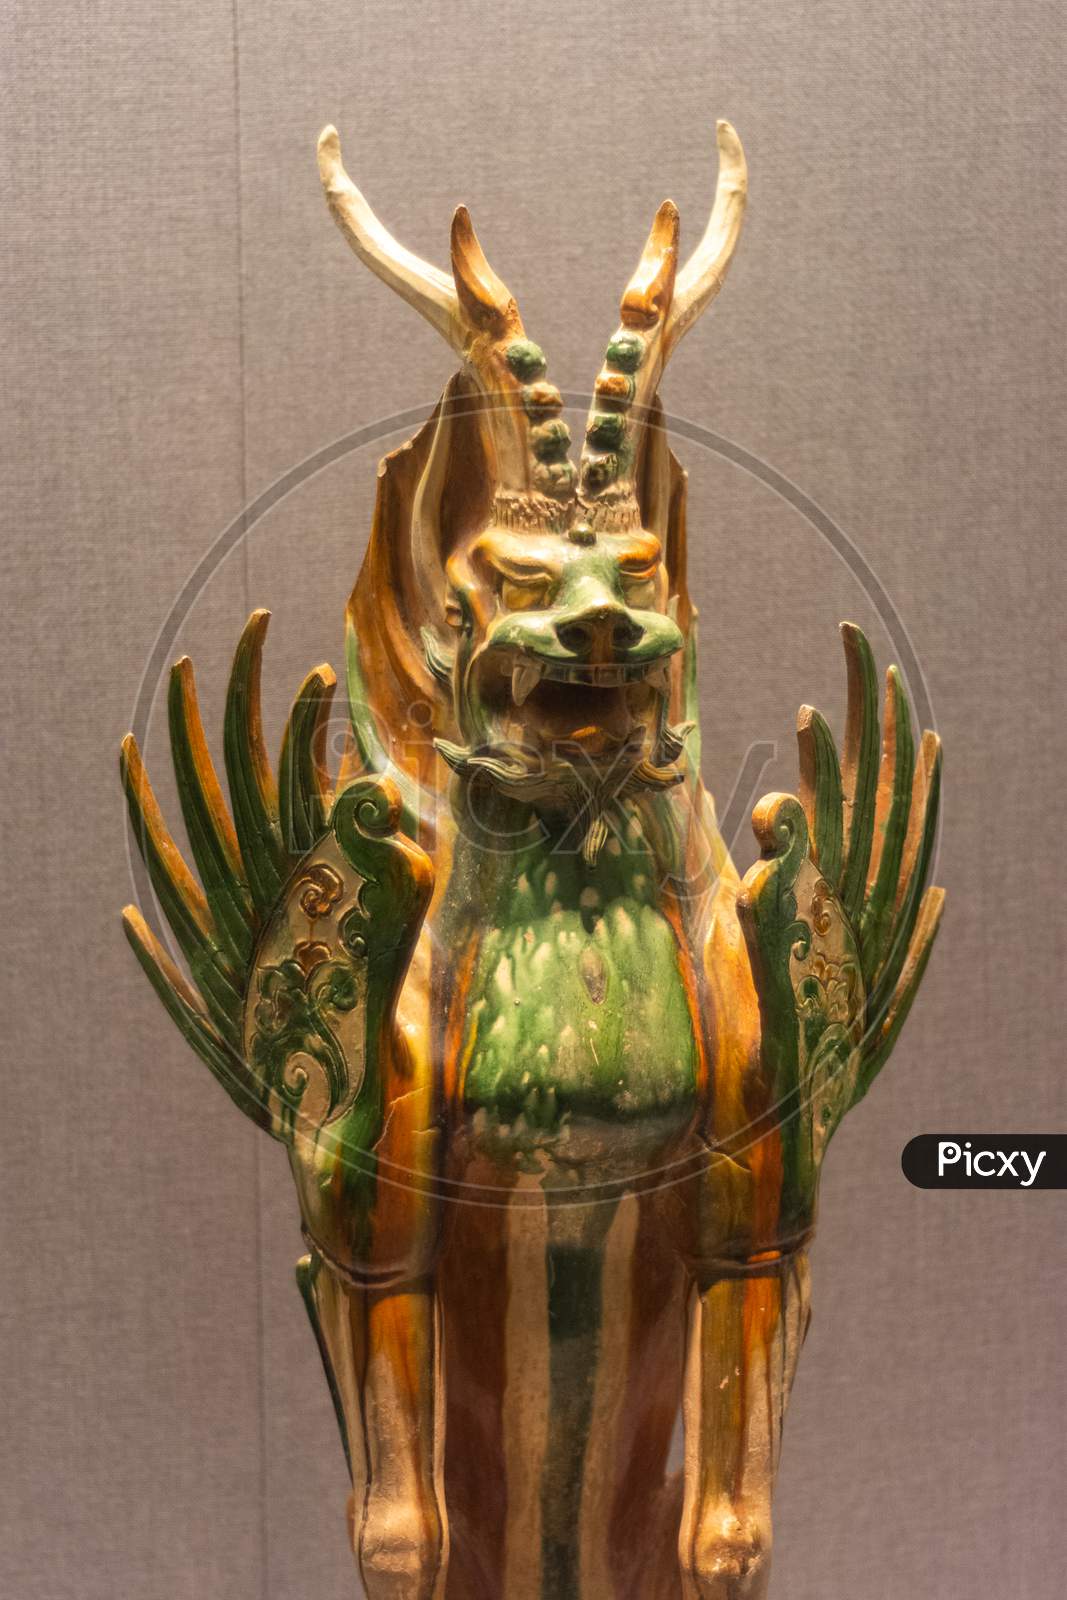 Tang Dynasty Clay Pottery Statue Of A Dragon In Luoyang Museum In Luoyang, China